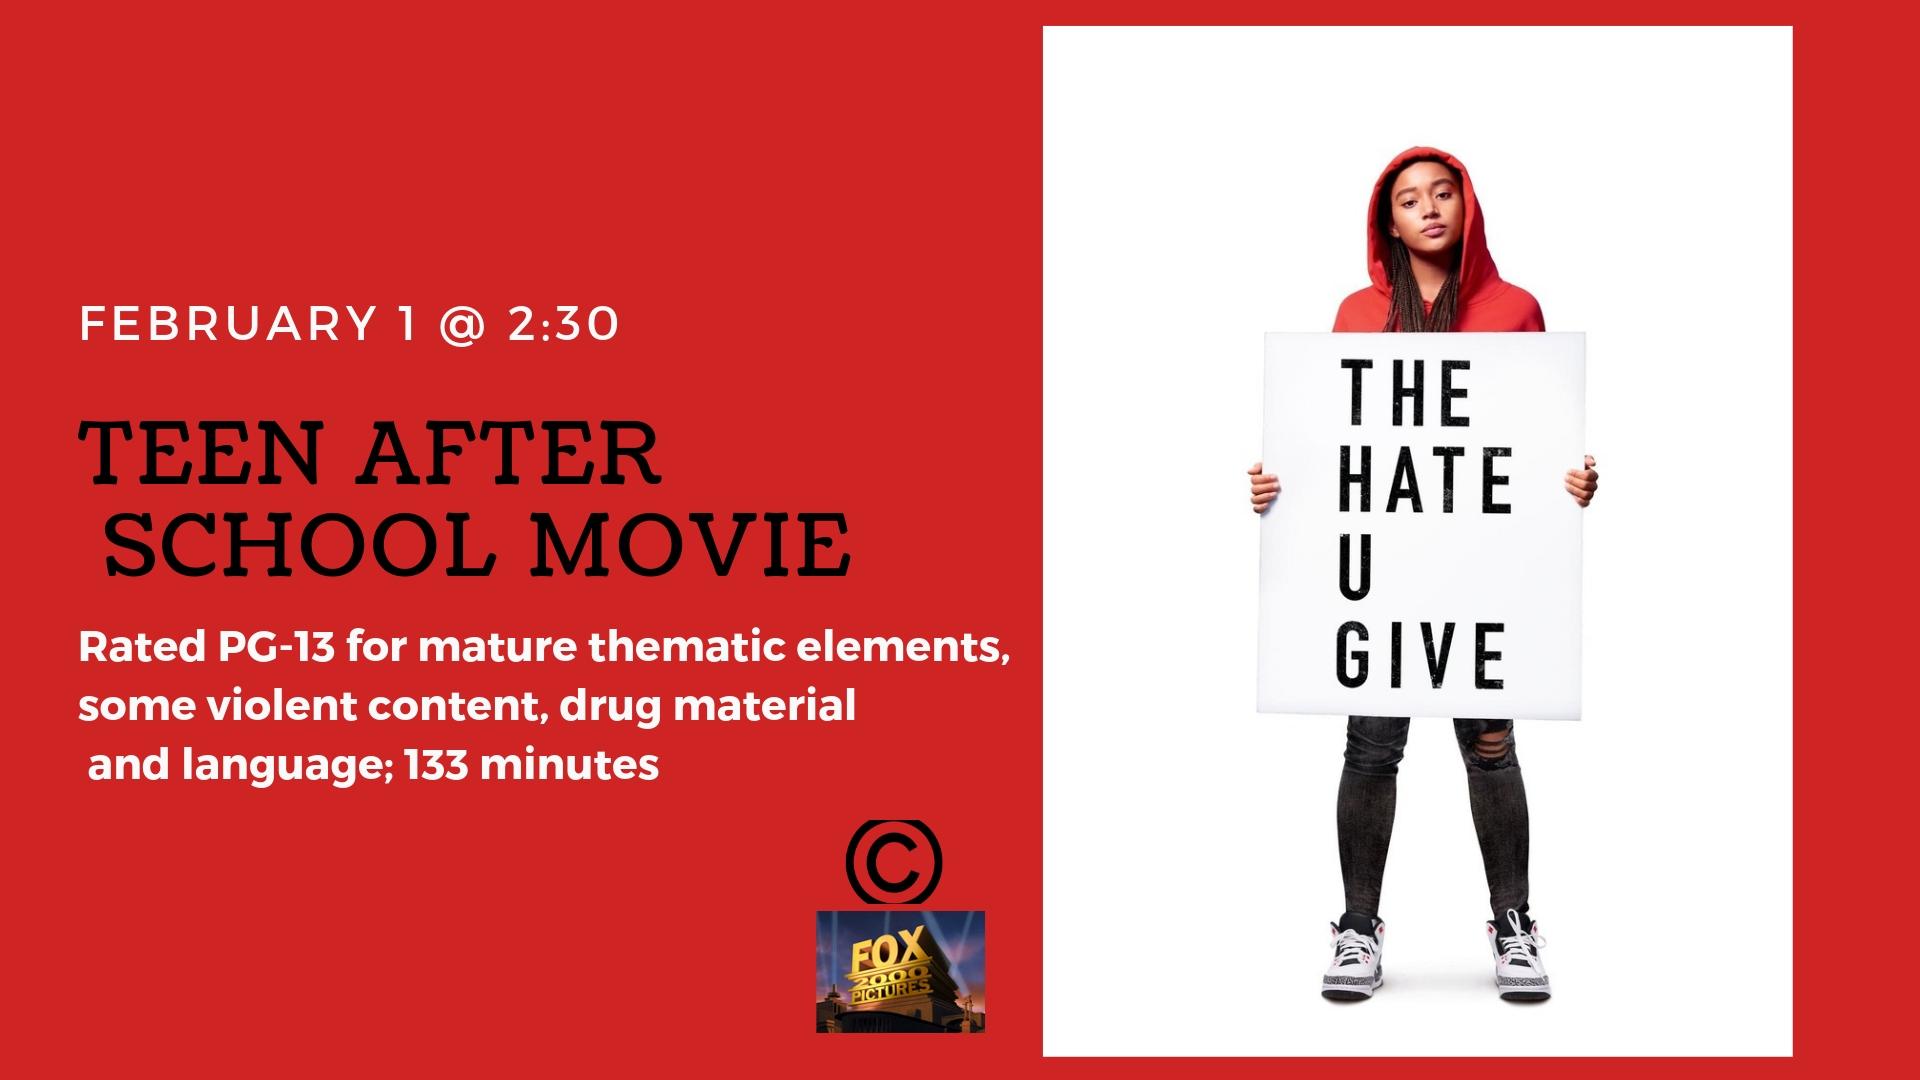 Teen After School Movie: The Hate U Give